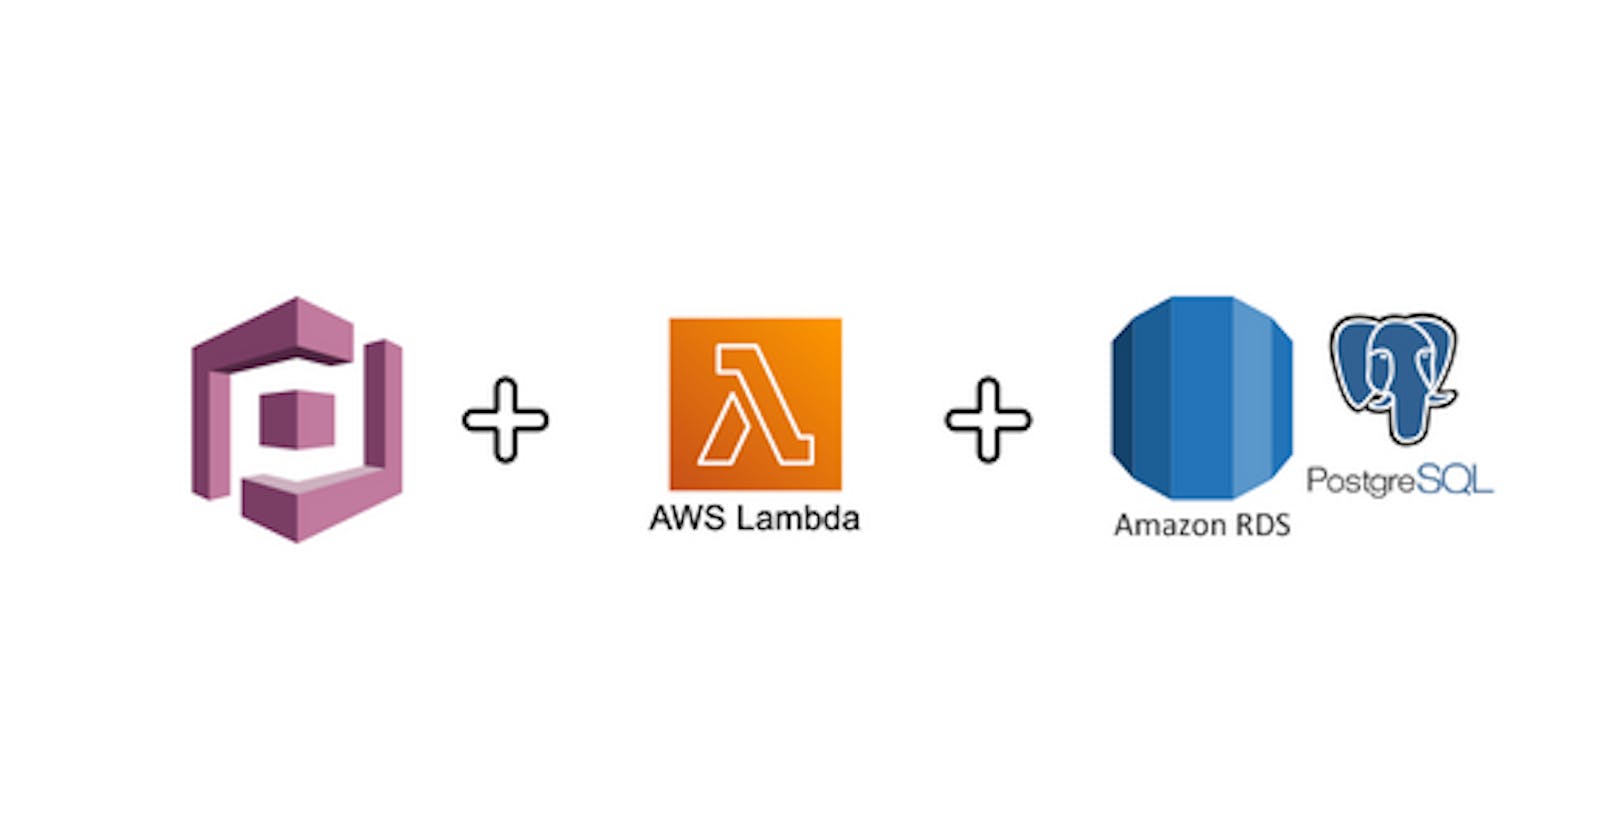 Add Cognito signed-up users to RDS Postgres database by AWS Lambda function